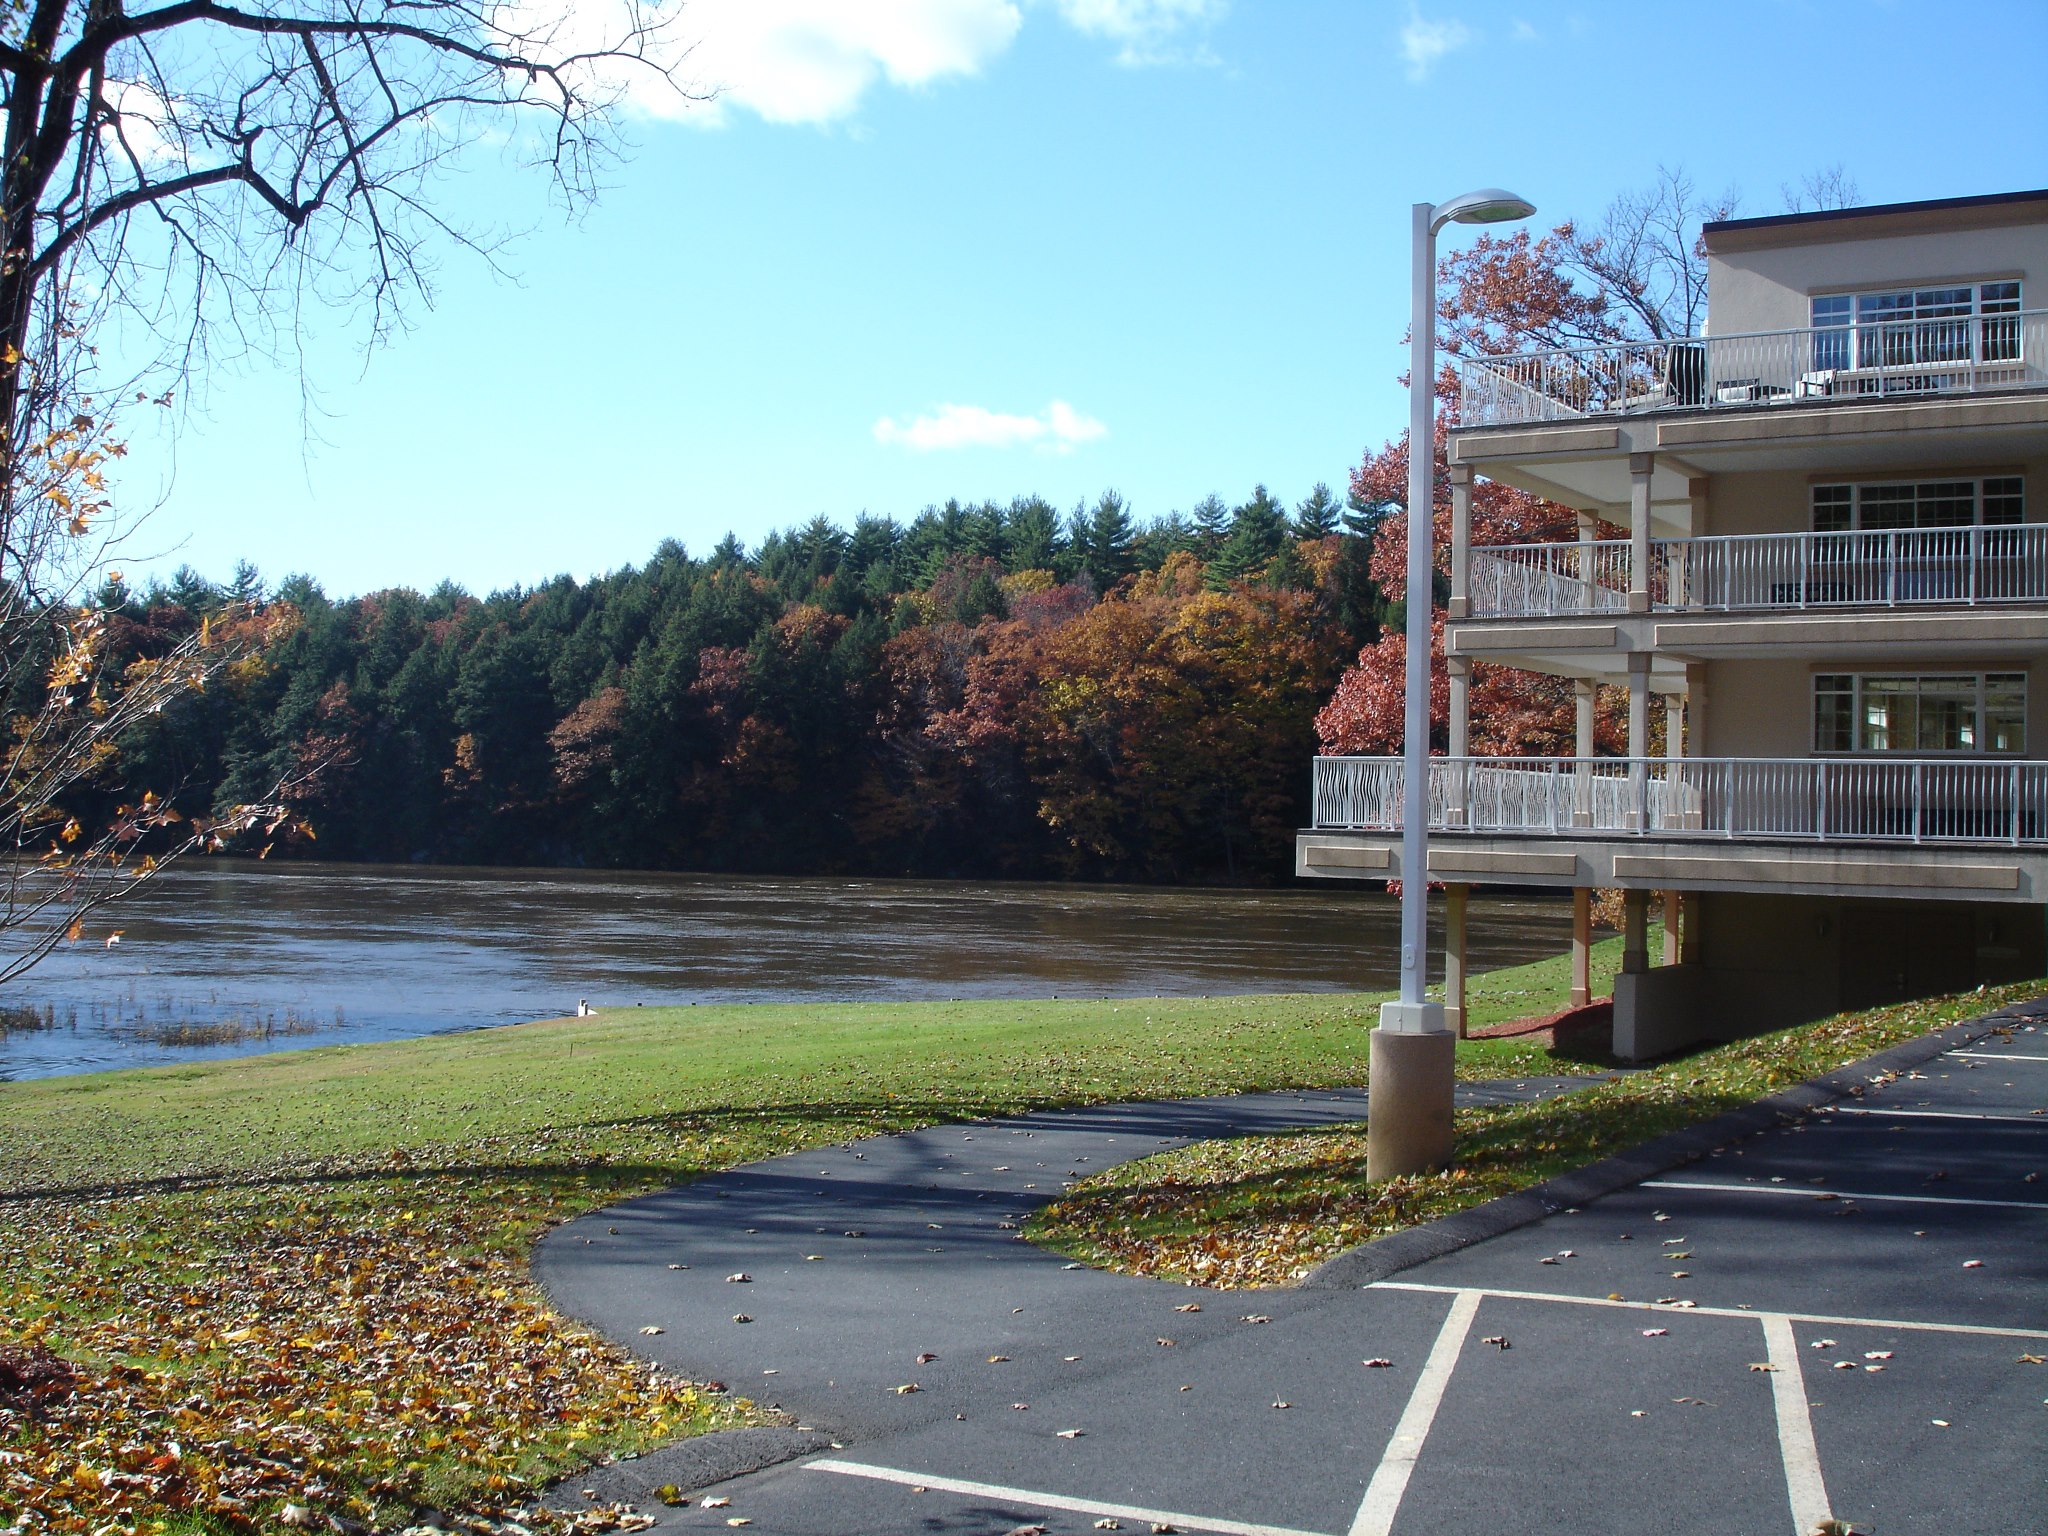 view of hotel balconies and river during fall time with orange and red leaves